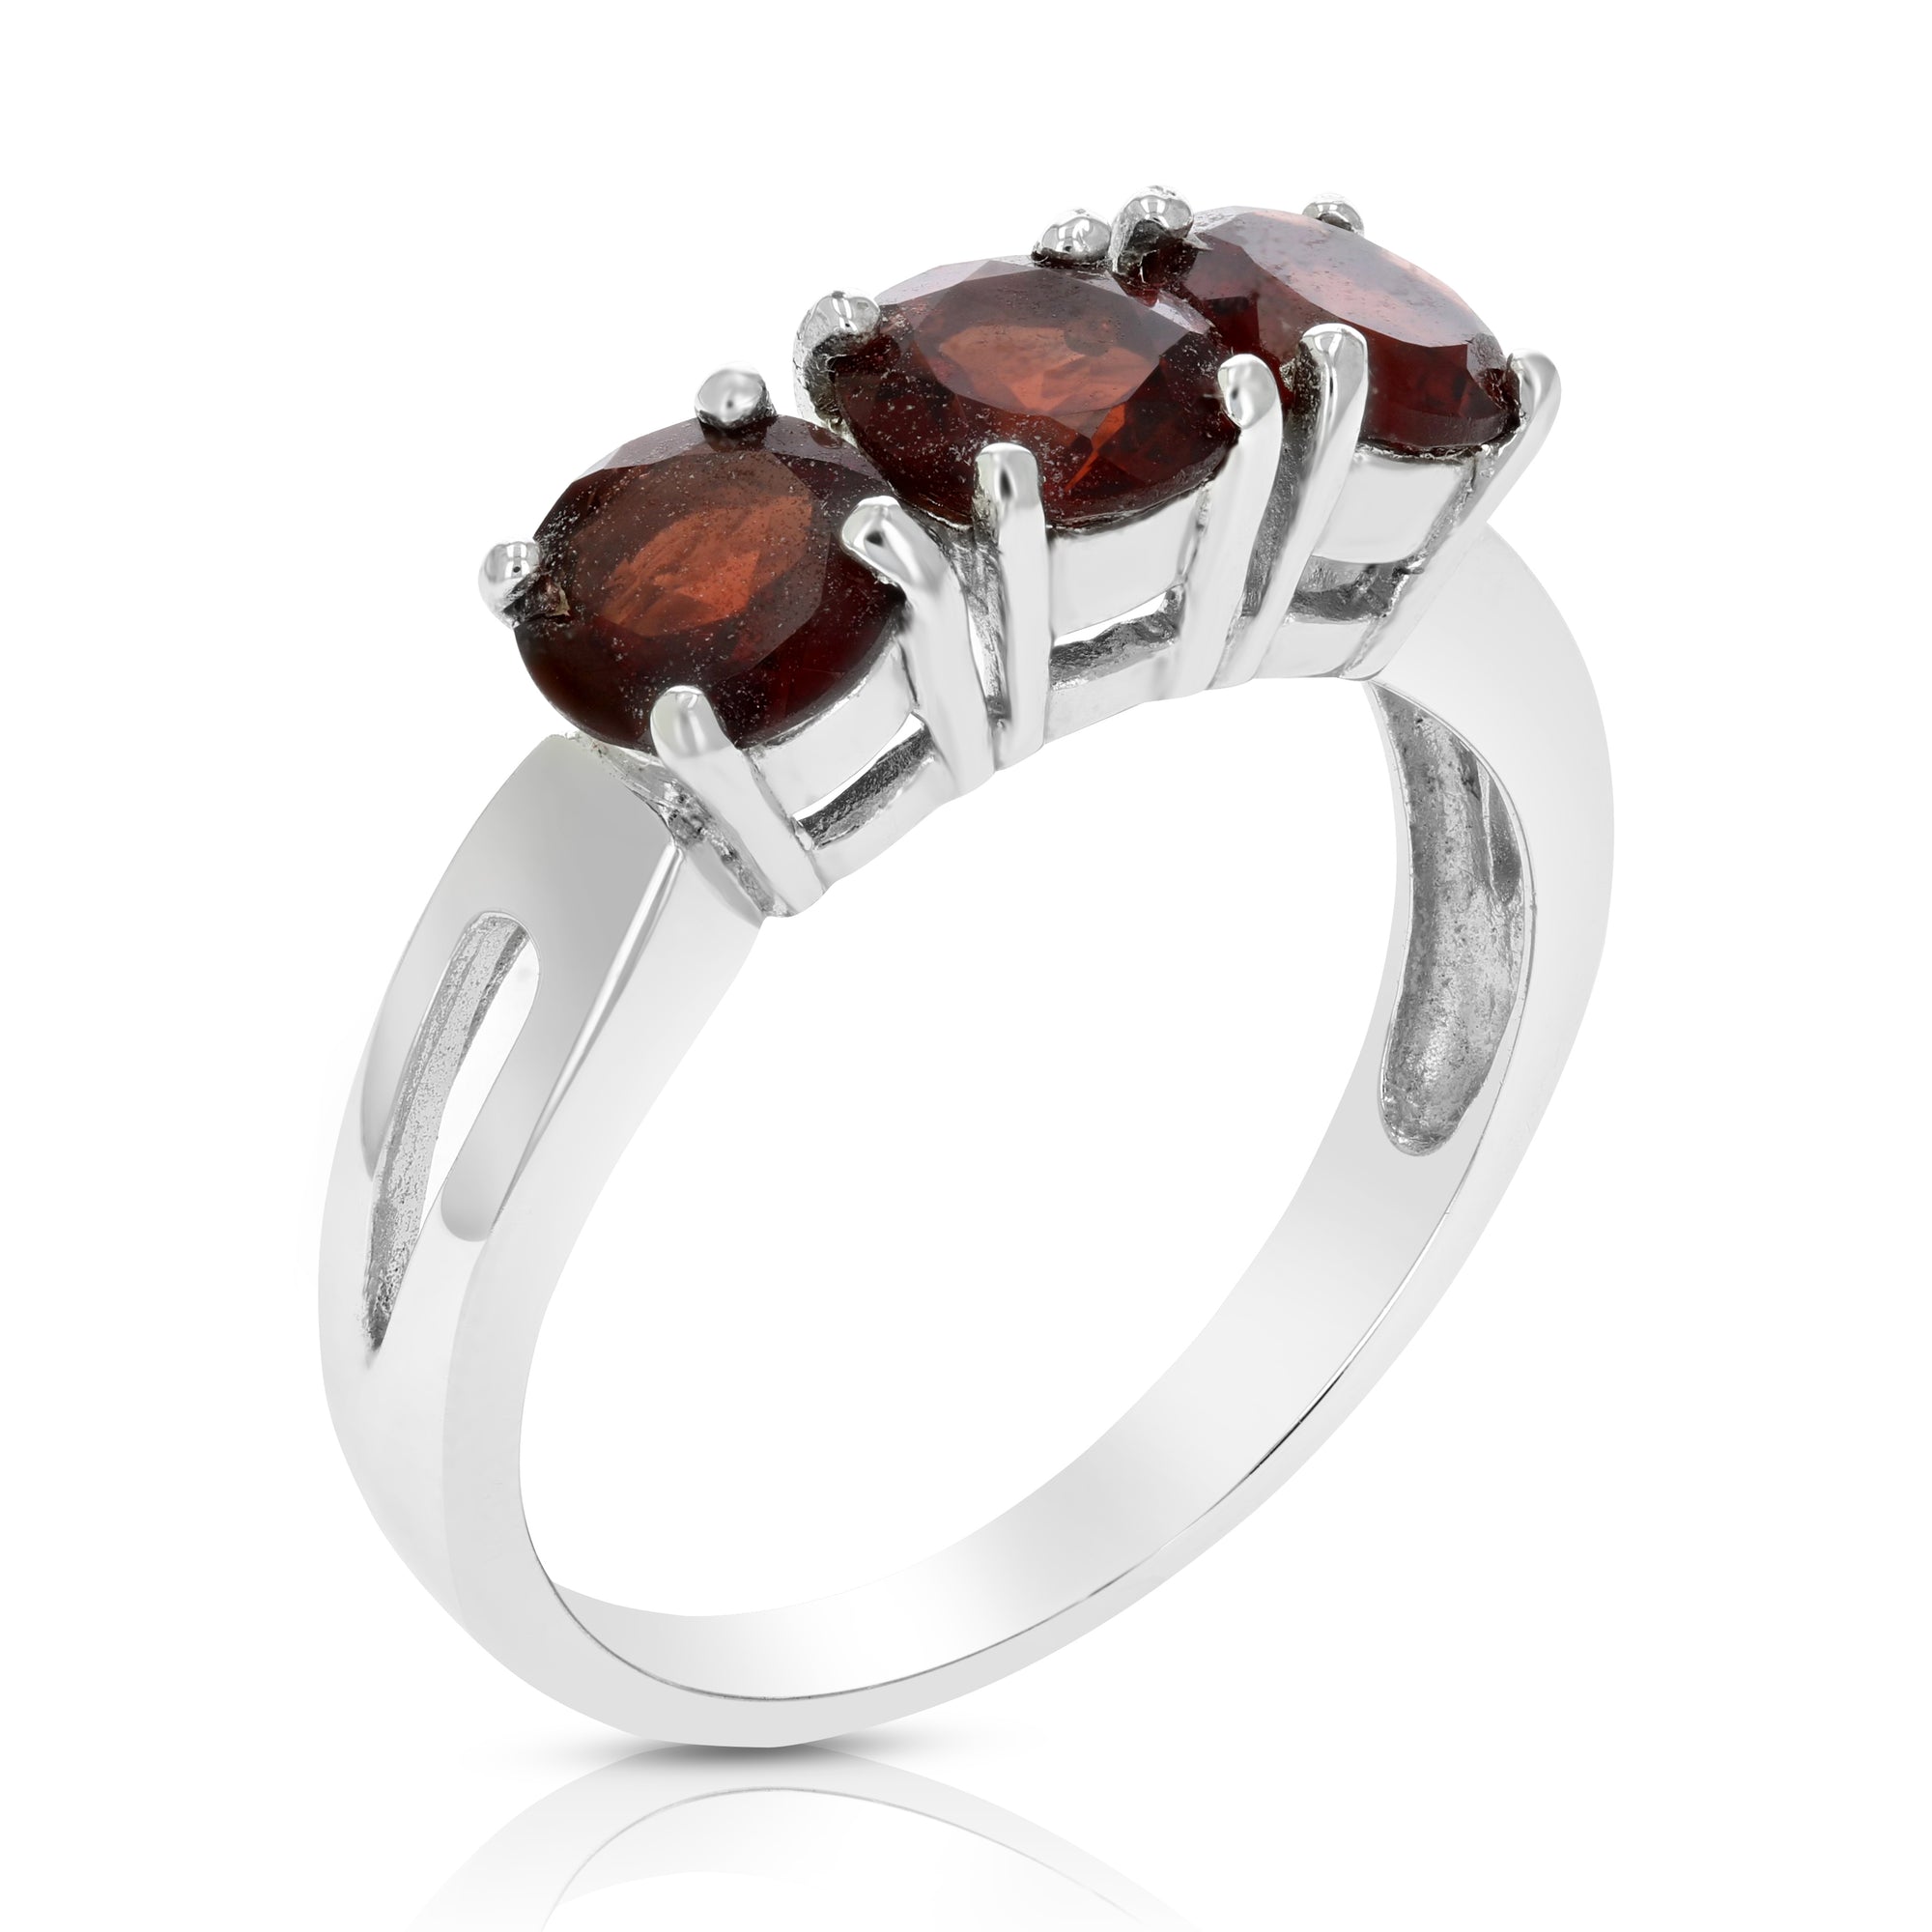 1.70 cttw 3 Stone Garnet Ring in .925 Sterling Silver with Rhodium Plating Round